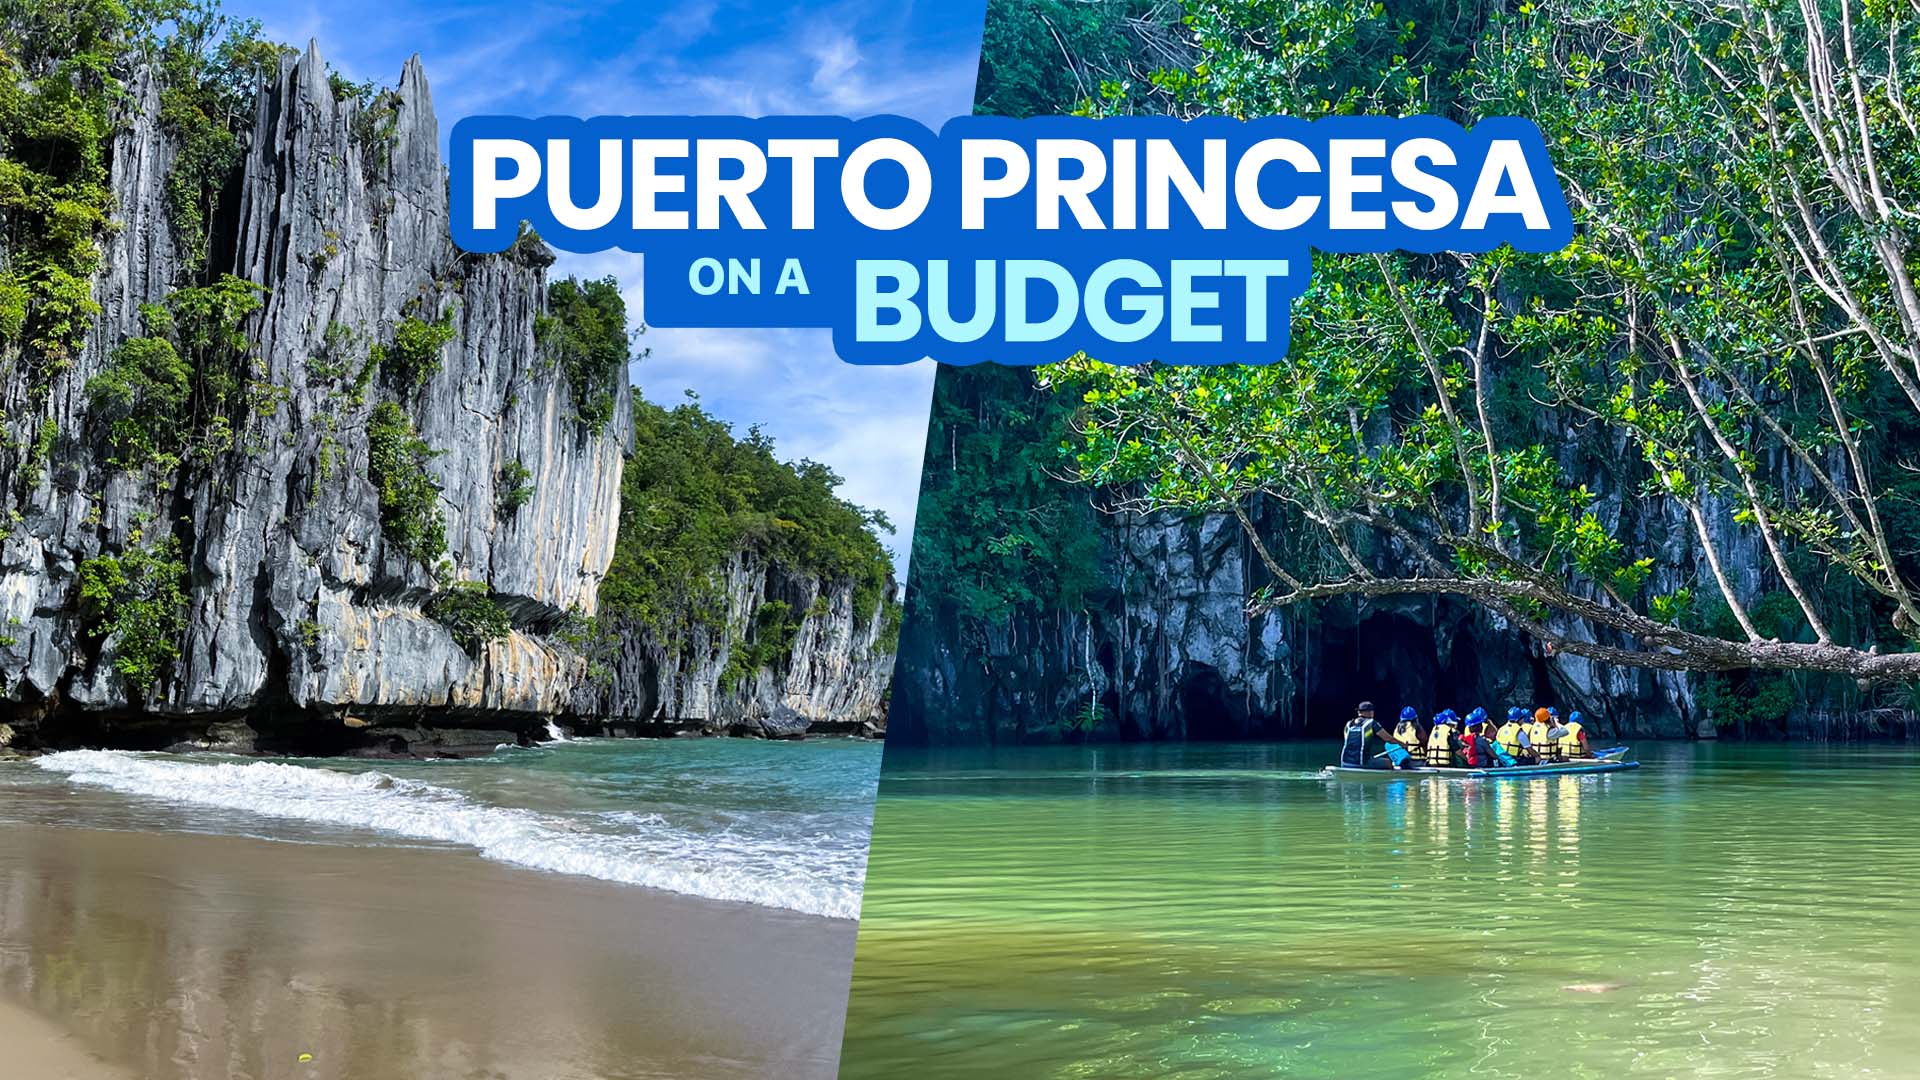 2022 PUERTO PRINCESA TRAVEL GUIDE with Requirements, Sample Itinerary & Budget